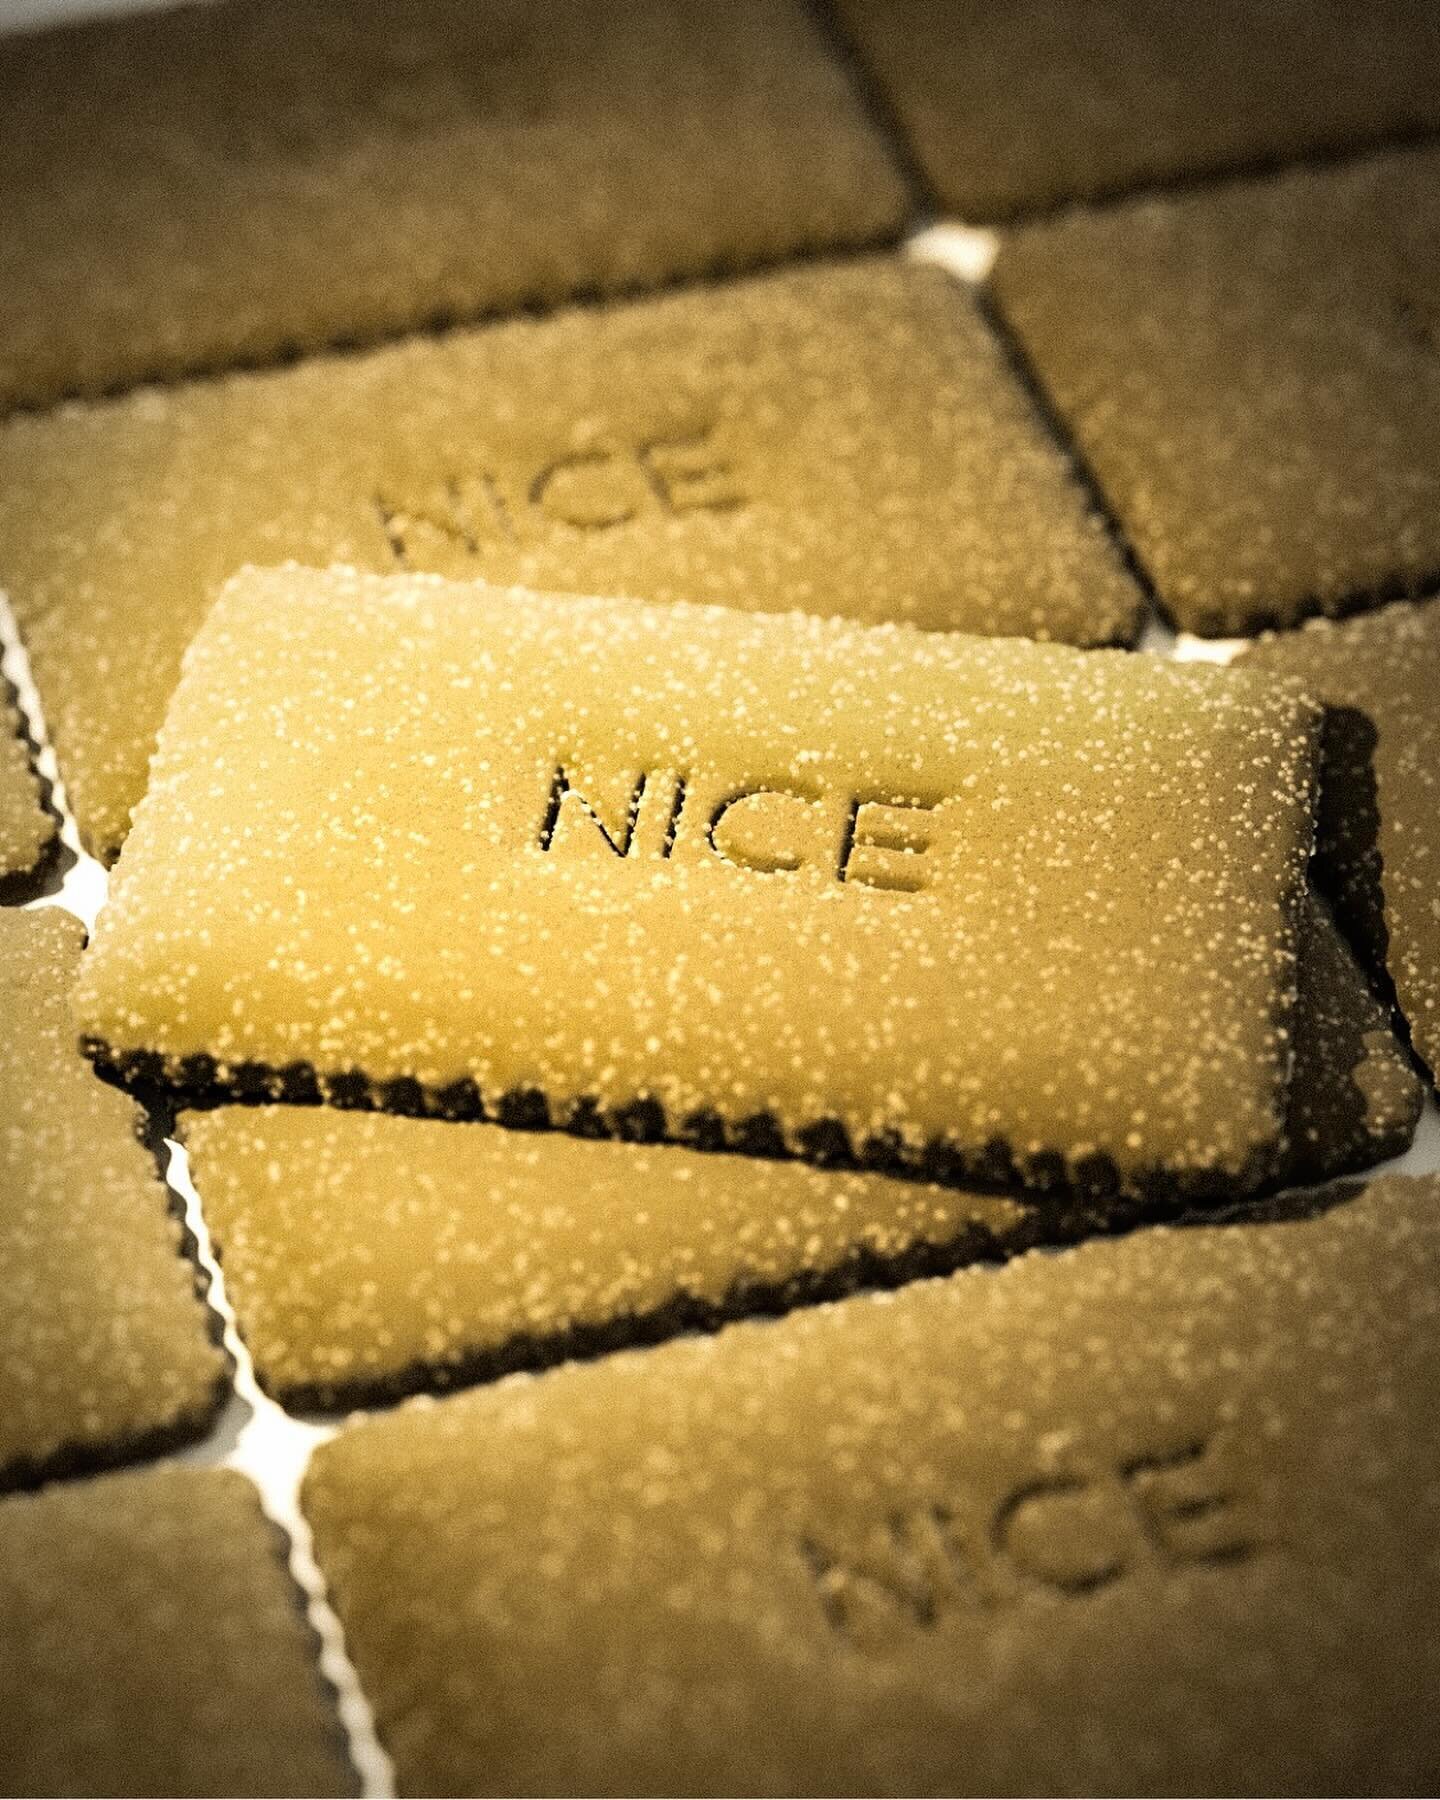 Nice Biscuits

#nicebiscuits #3DRender #maxonone #zbrush #c4d #redshift #3DArt #motiongraphics